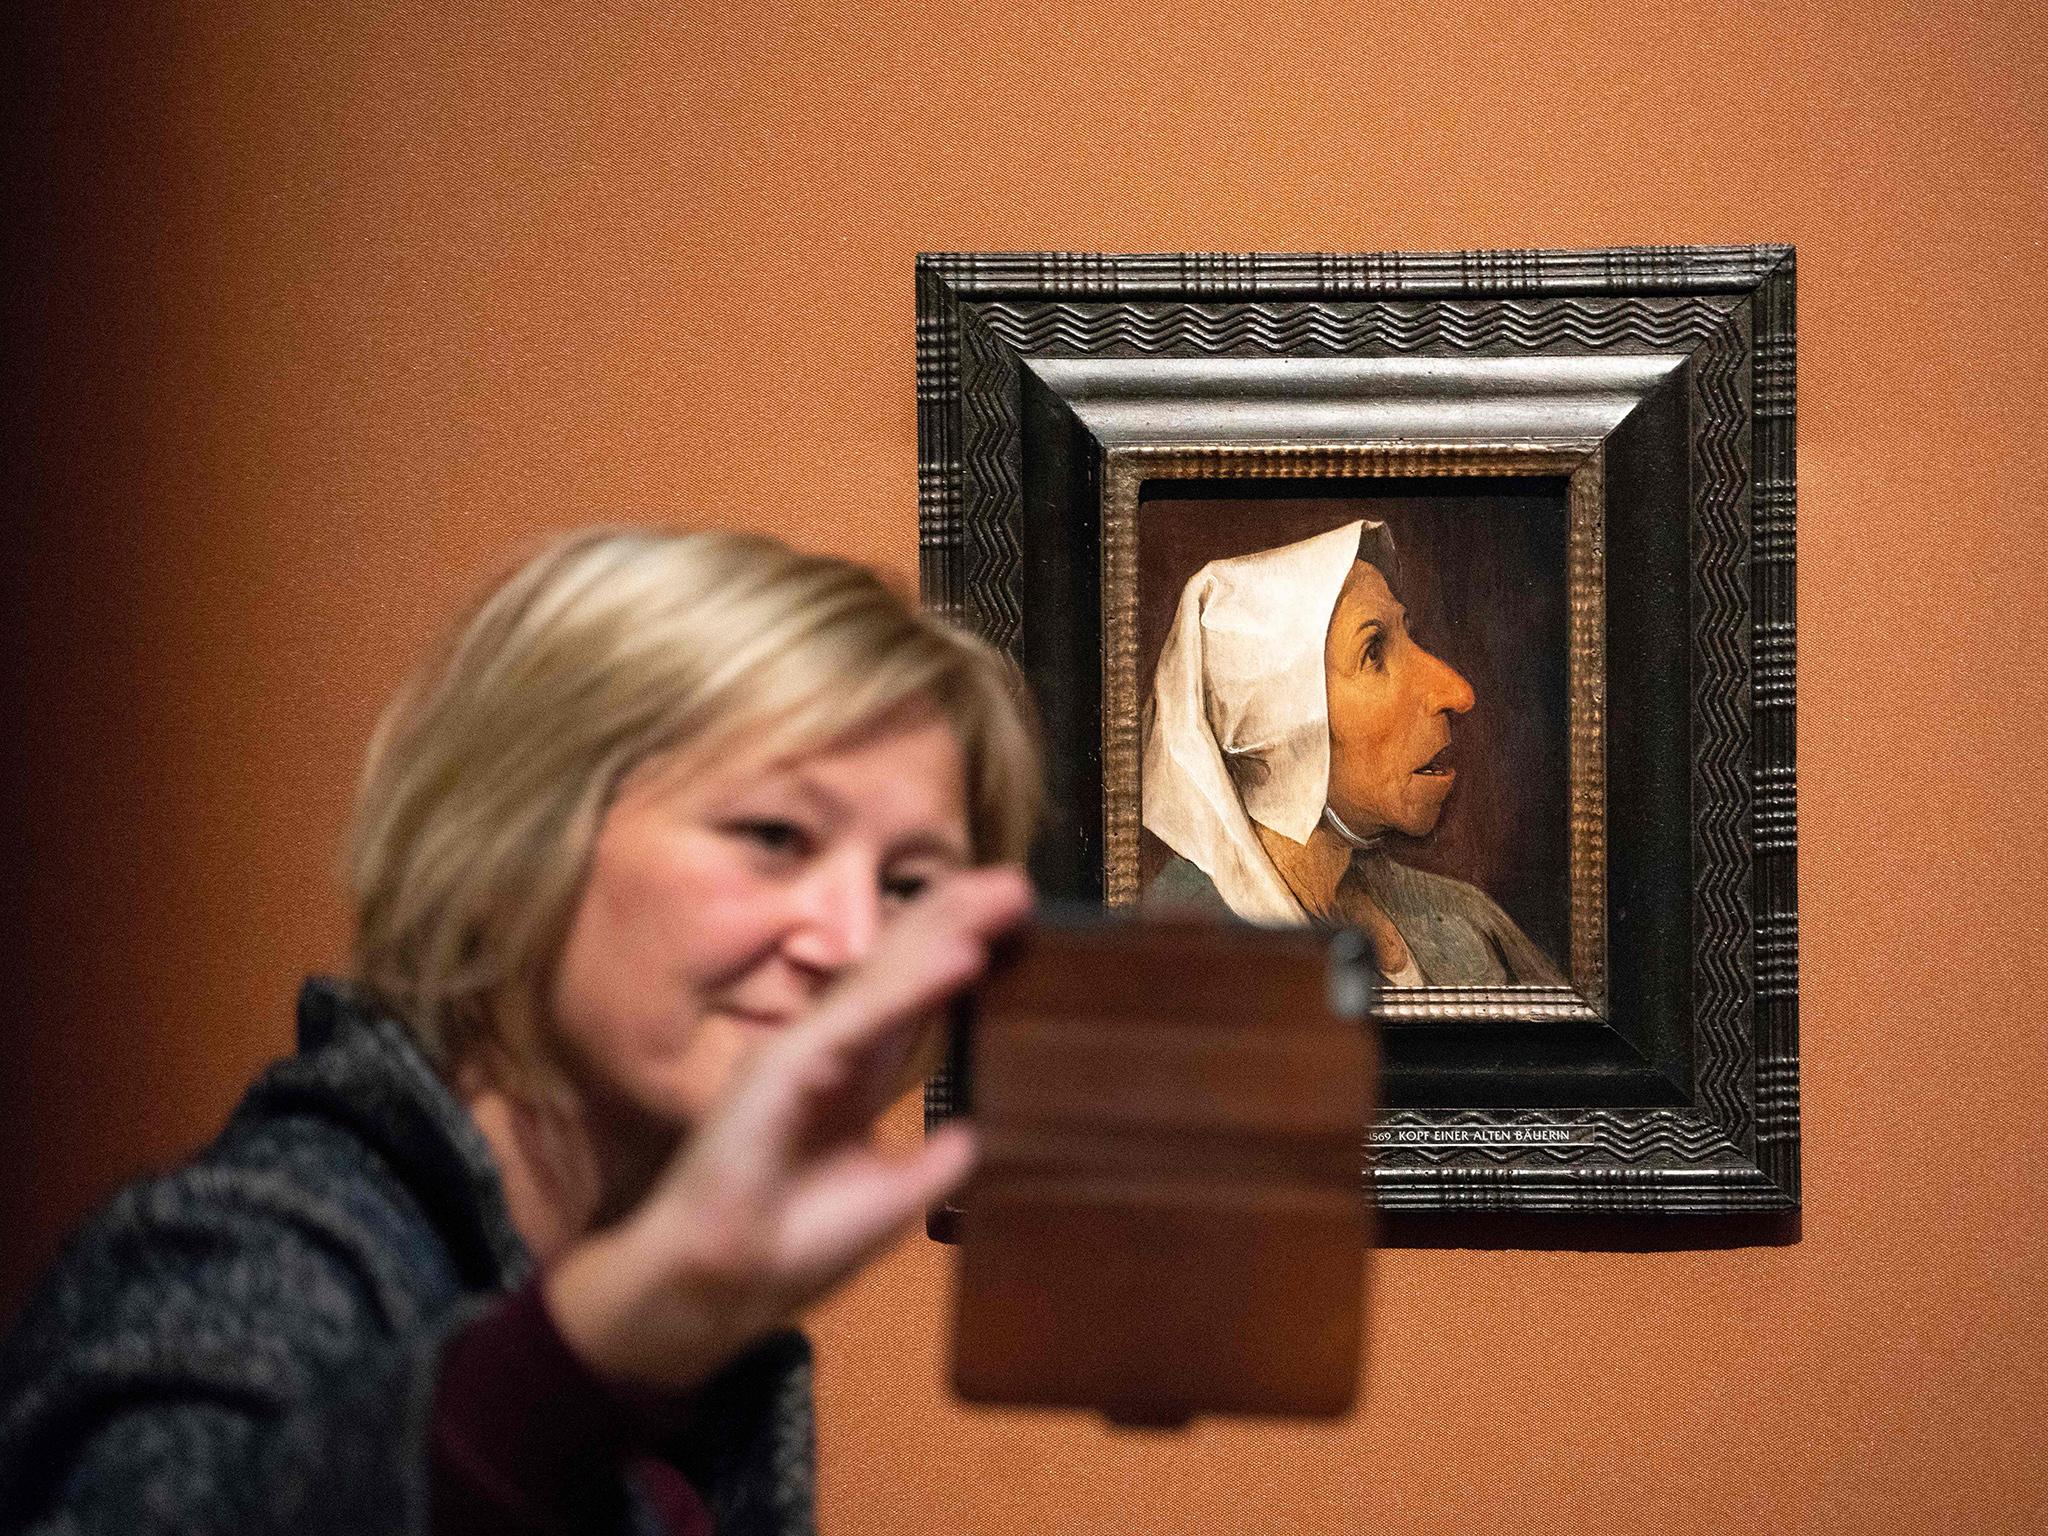 A visitor takes a selfie with Pieter Bruegel the Elder's ‘Head of a Peasant Woman’ at the Kunsthistorisches Museum in Vienna